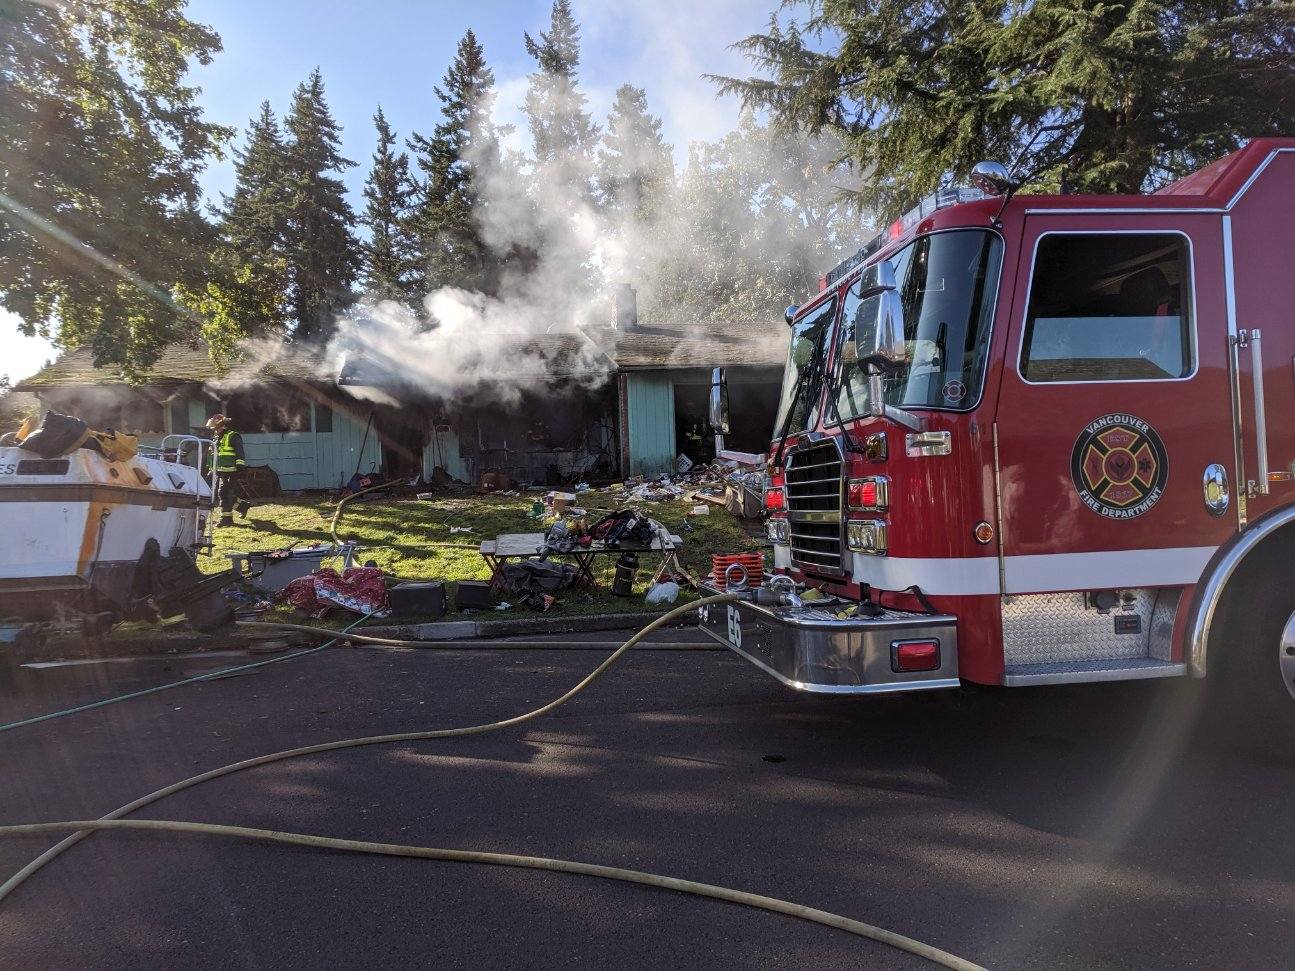 Vancouver firefighters responded at 9:37 a.m. to 12817 N.E. 14th St., for a report of a residential fire. Firefighters could see a column of smoke while they were en route, according to the Vancouver Fire Department. A resident suffered non life-threatening injuries but declined to be taken to a hospital.